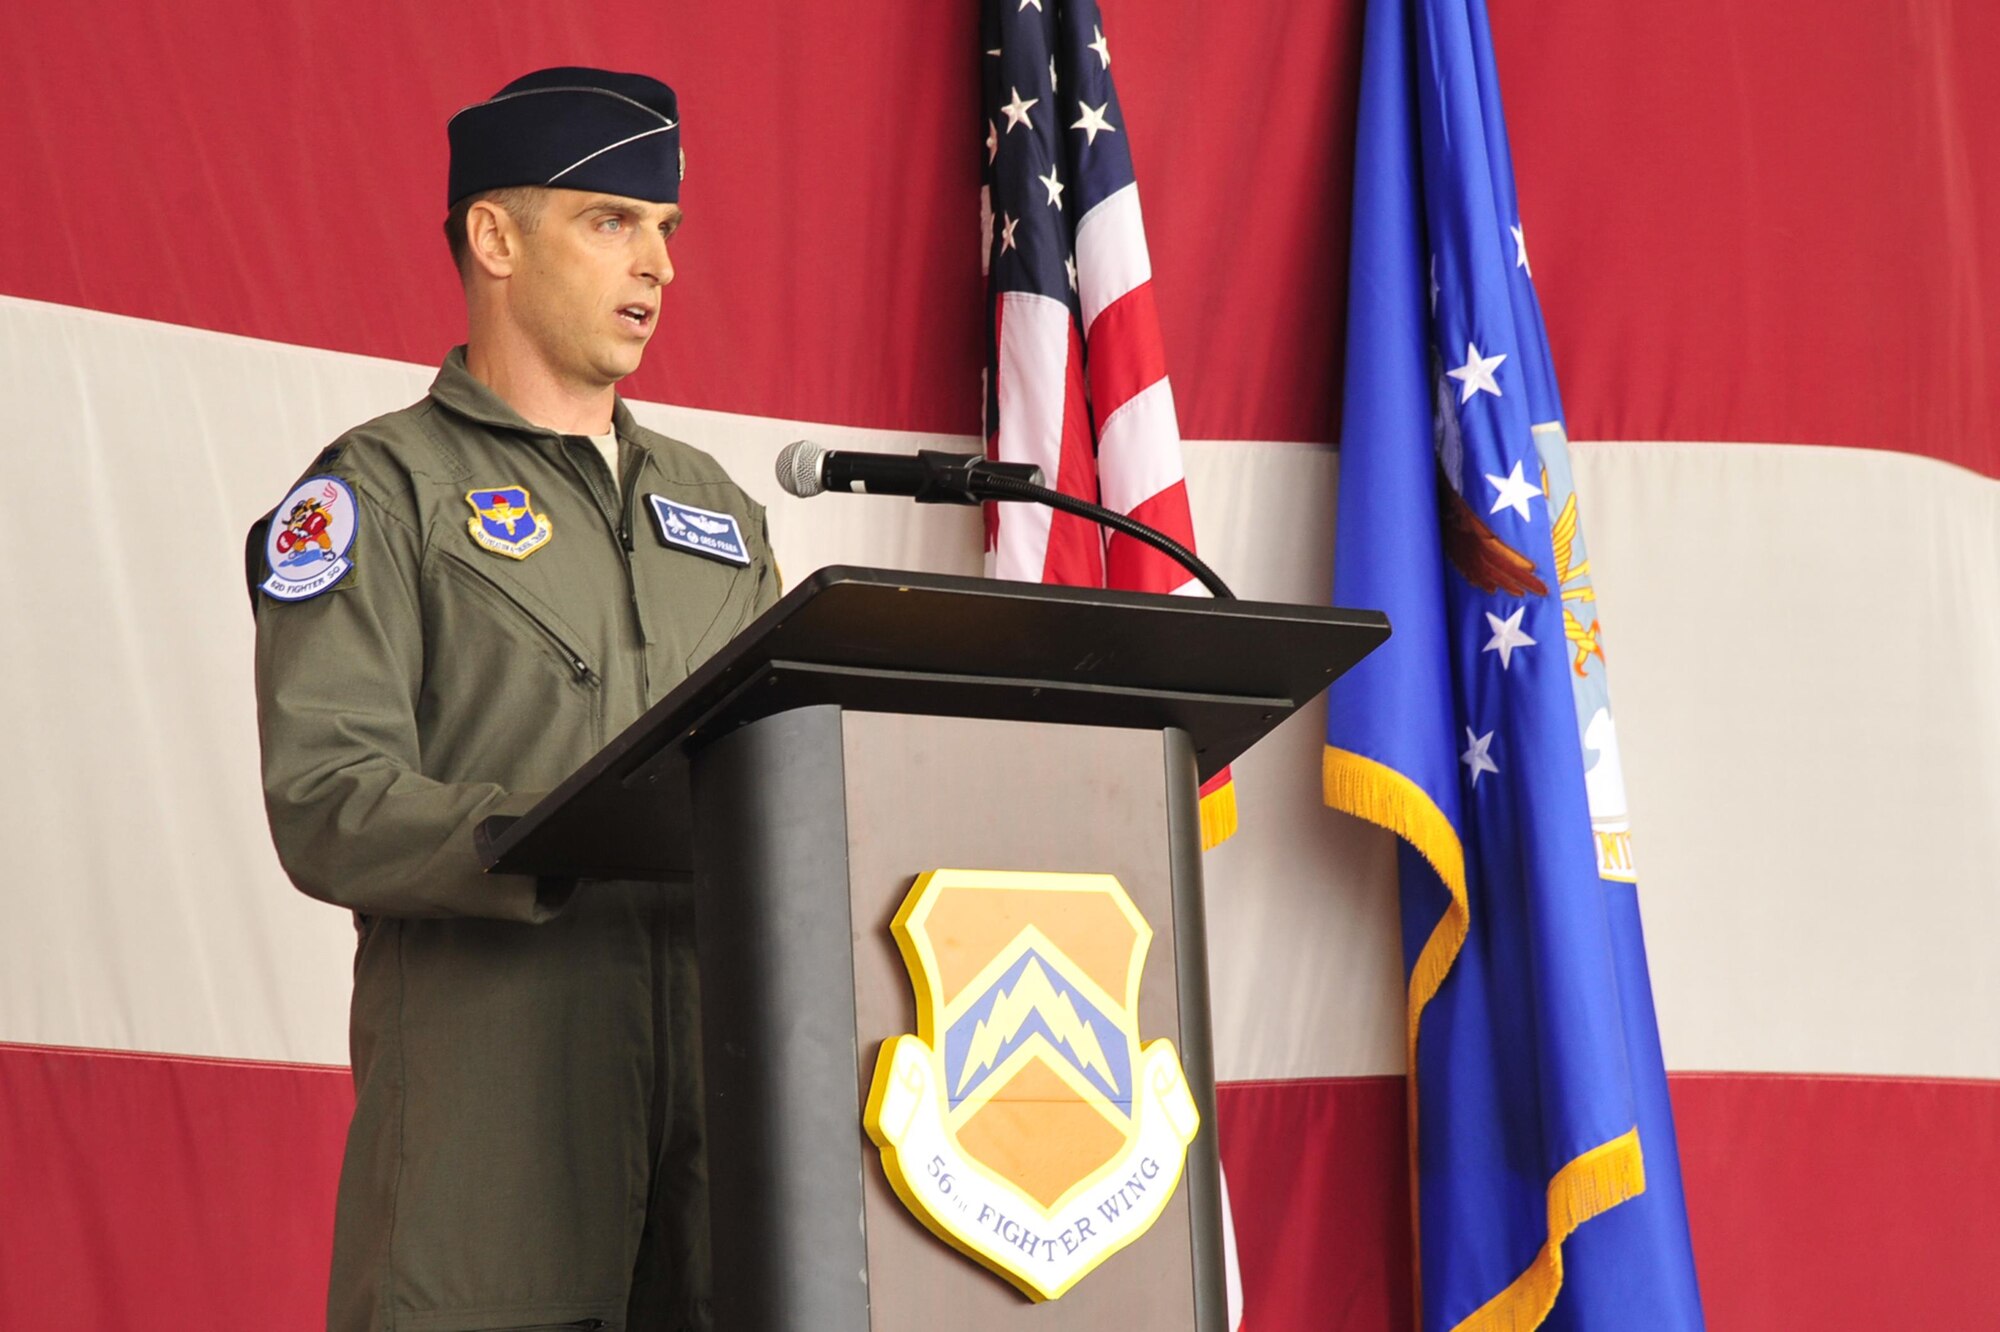 Lt. Col. Gregory Frana assumes command of the 62nd Fighter Squadron June 5, 2015 at Luke Air Force Base, Arizona. The 62nd FS is scheduled to begin accepting F-35 Lightning II jets in July and will be joined by partner nations Norway and Italy. (Courtesy Photo)